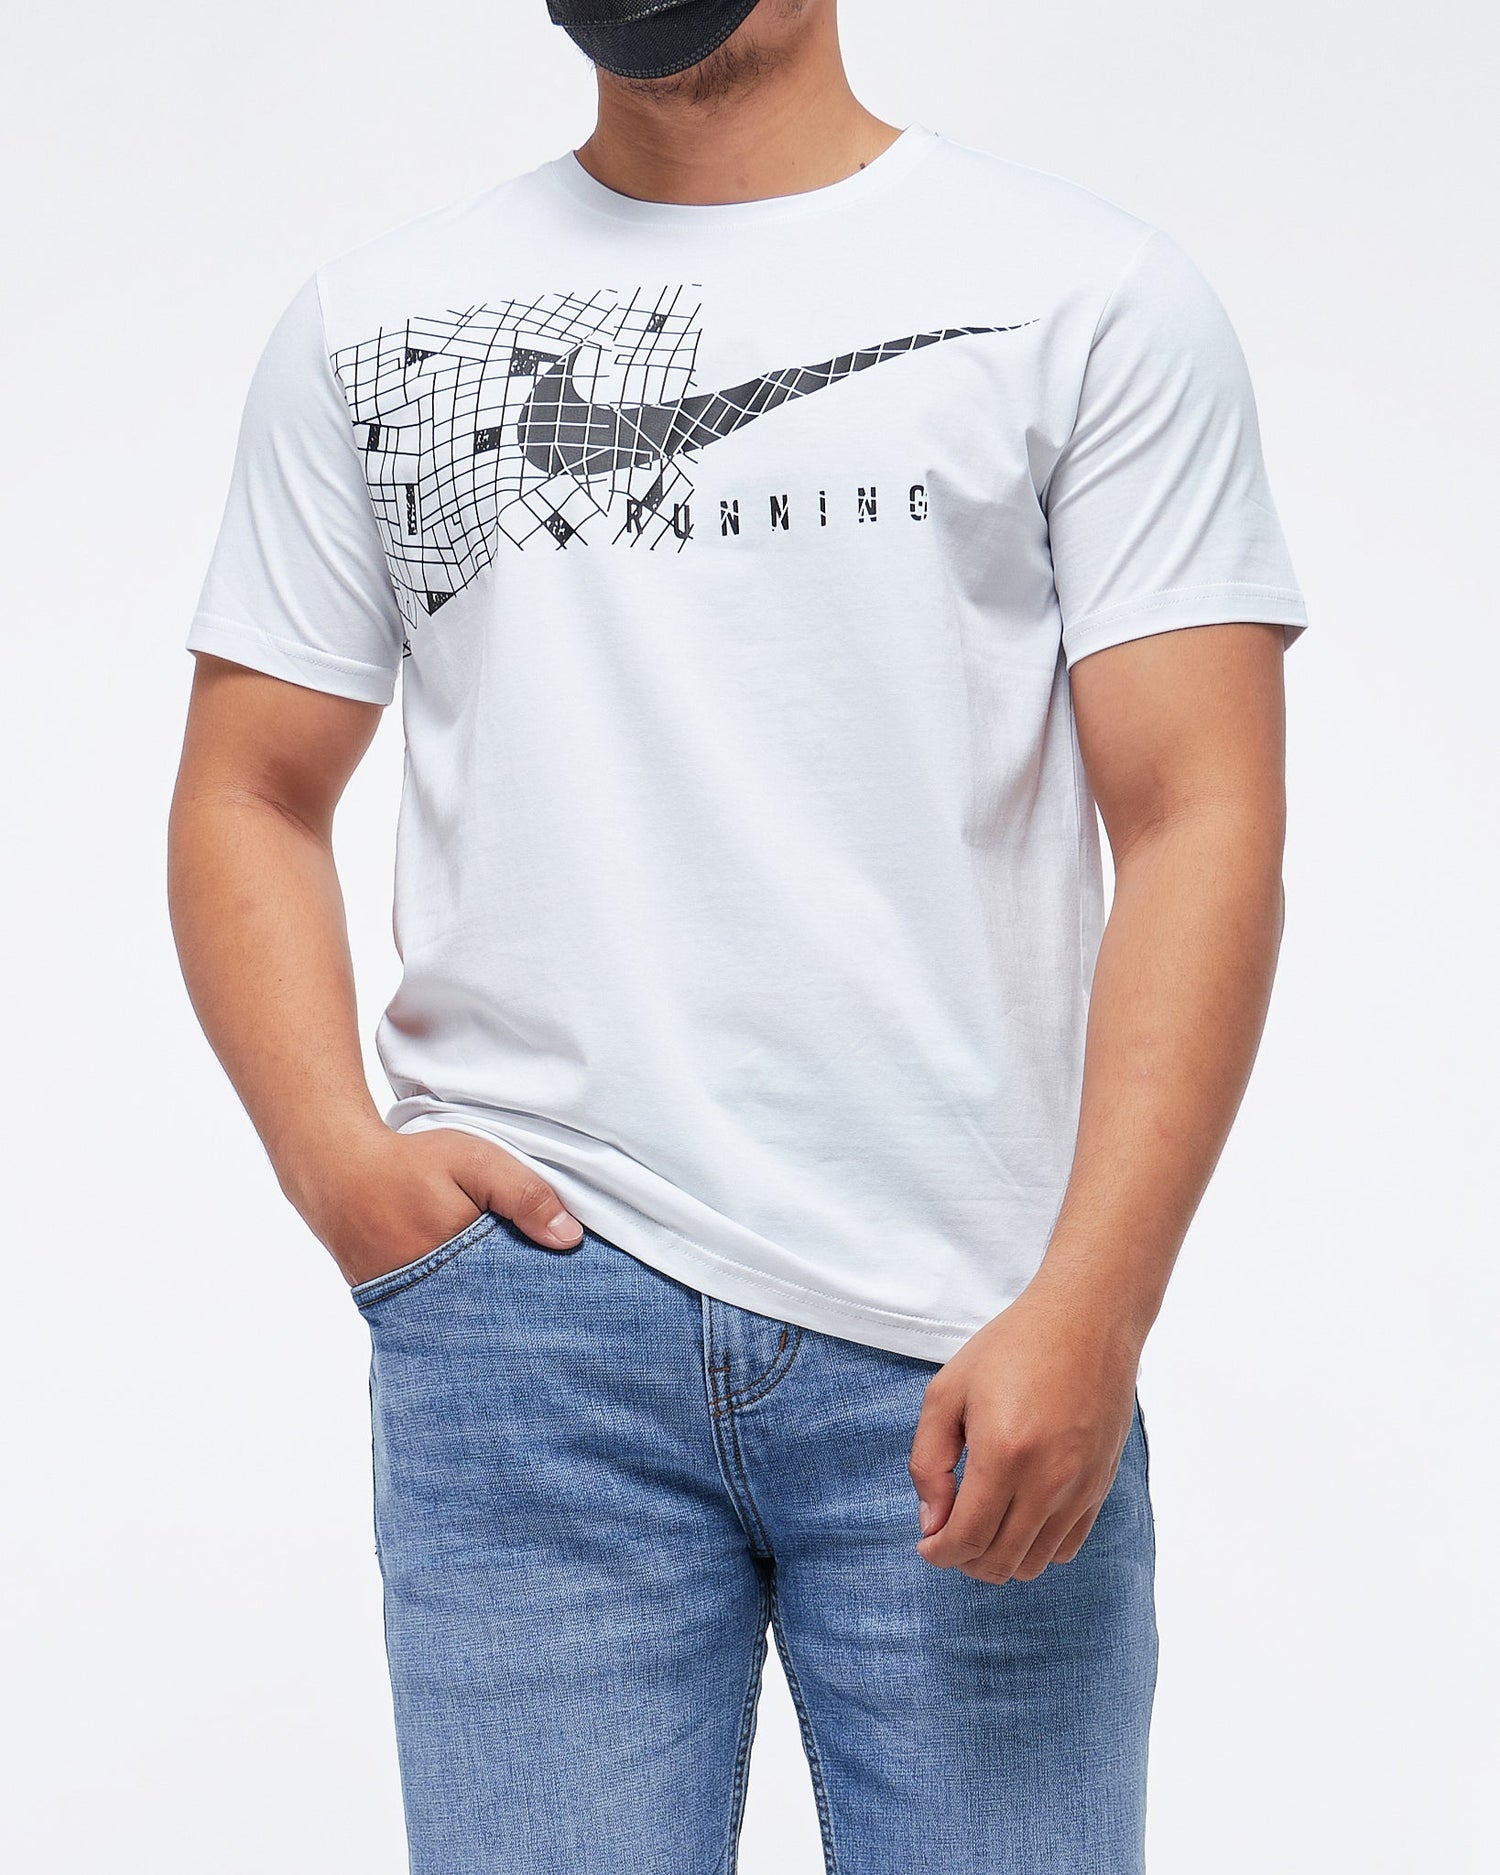 MOI OUTFIT-Running Graphic Printed Sport Men T-Shirt 14.50